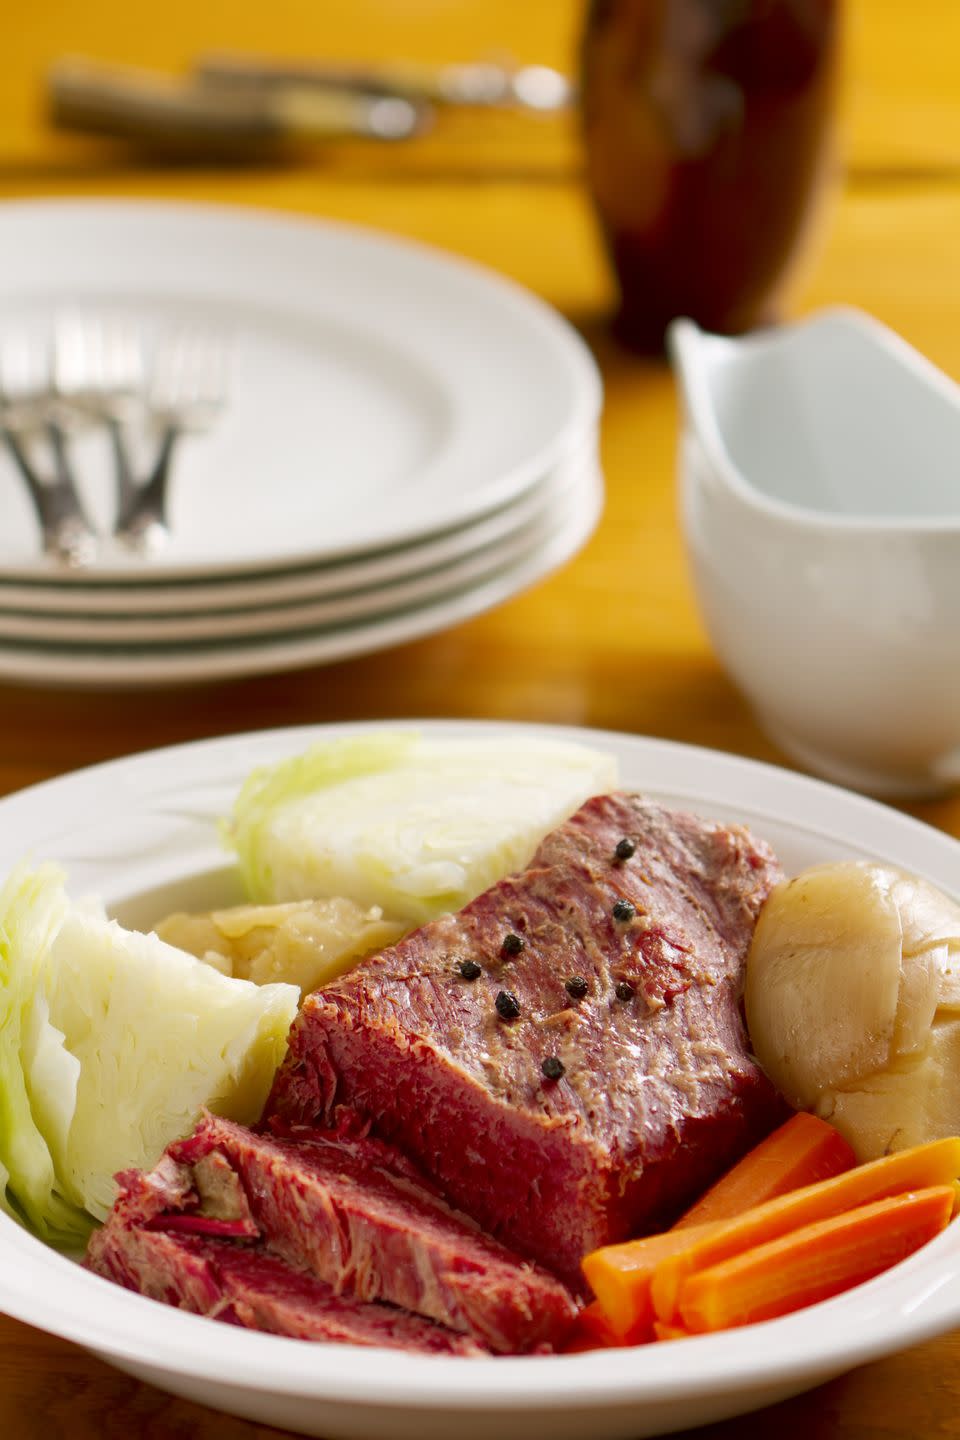 5) Corned Beef and Cabbage